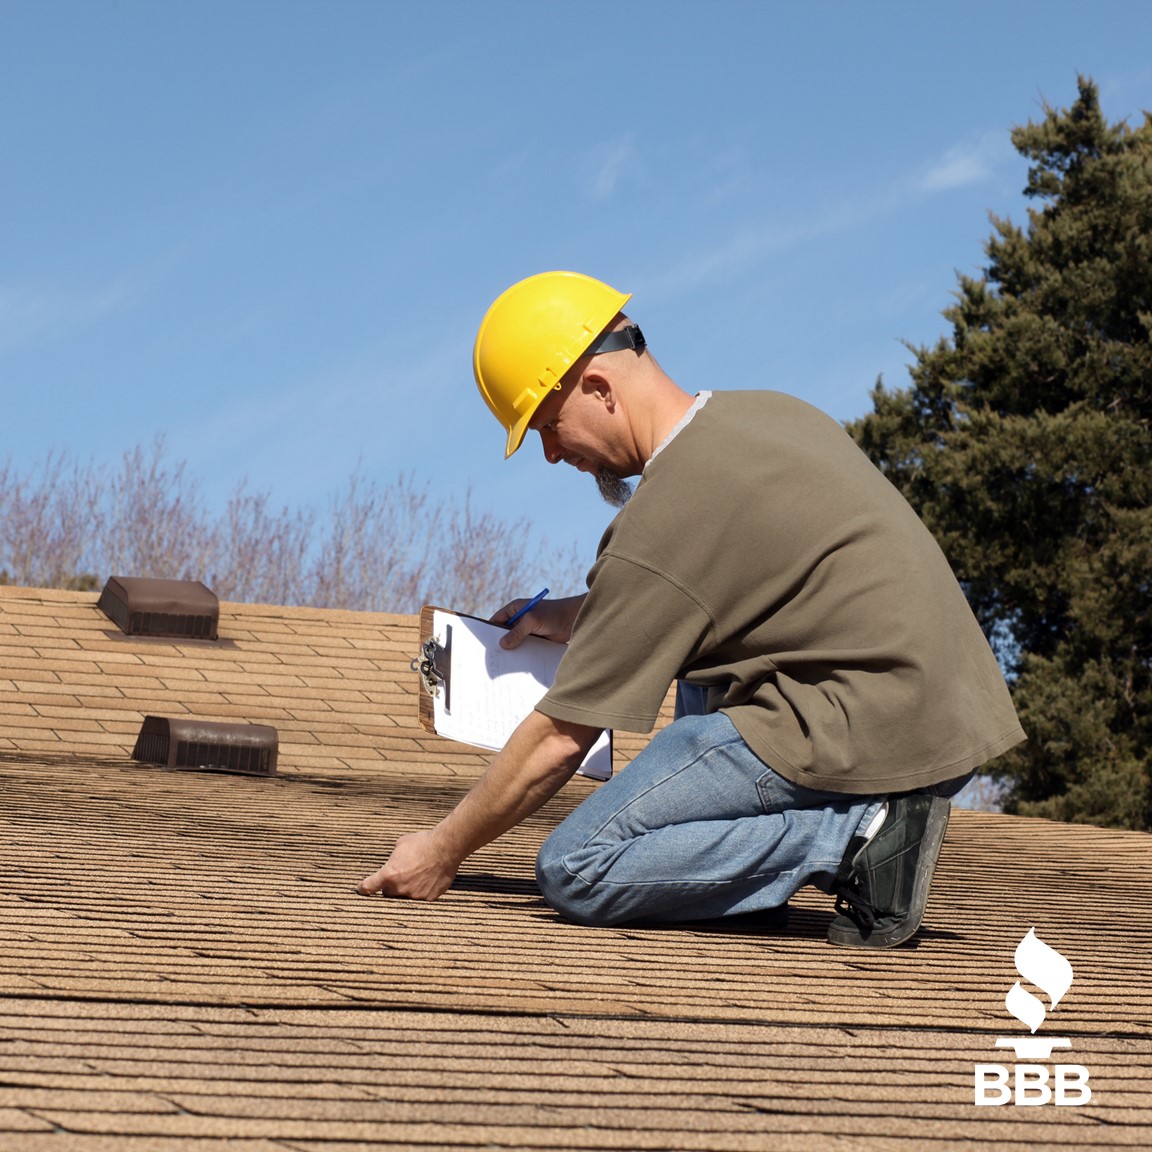 With the warmer weather and summer storms, roofing scams become more common. This spring, bbb.org/scamtracker is already receiving reports of shady “free” roof inspections. Homeowners should be on the lookout for these cons:  bit.ly/3DnL5YF

#BBBColaChas #RoofingScam